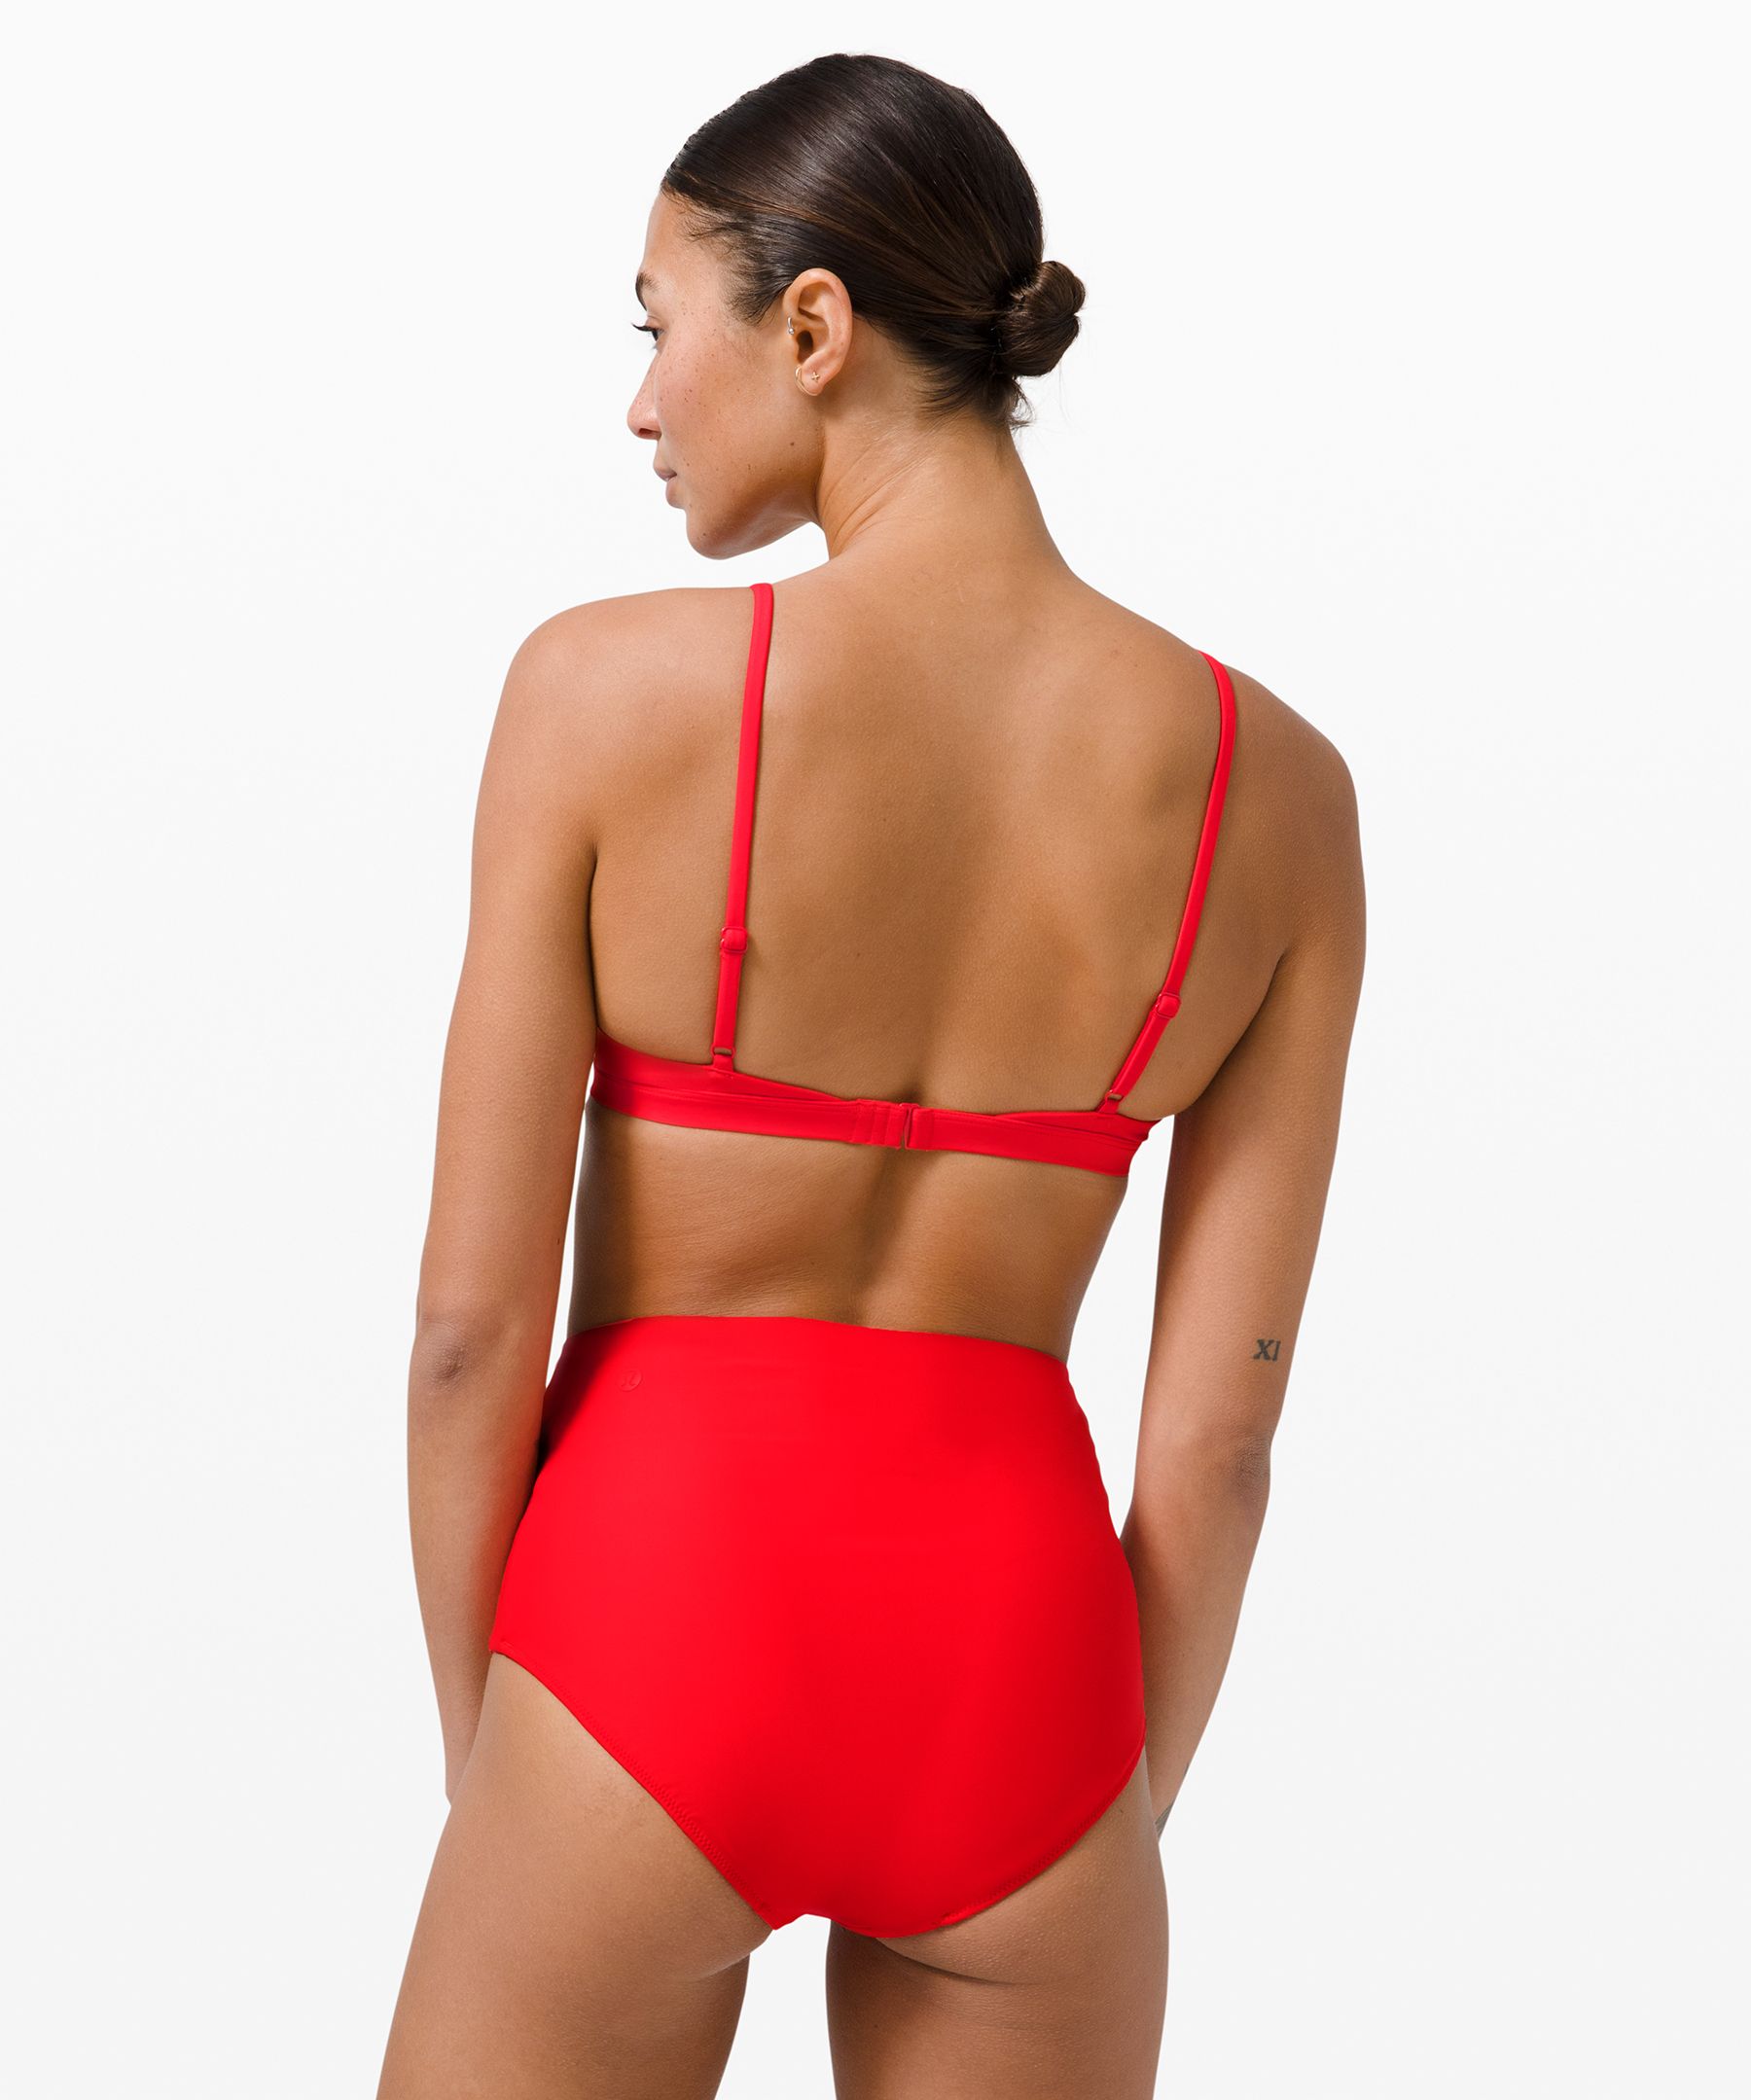 A Bikini For Big Boobs: Lululemon Waterside Swim Top *D Cup, 11 Lululemon  Swimsuits You Can Be Active In